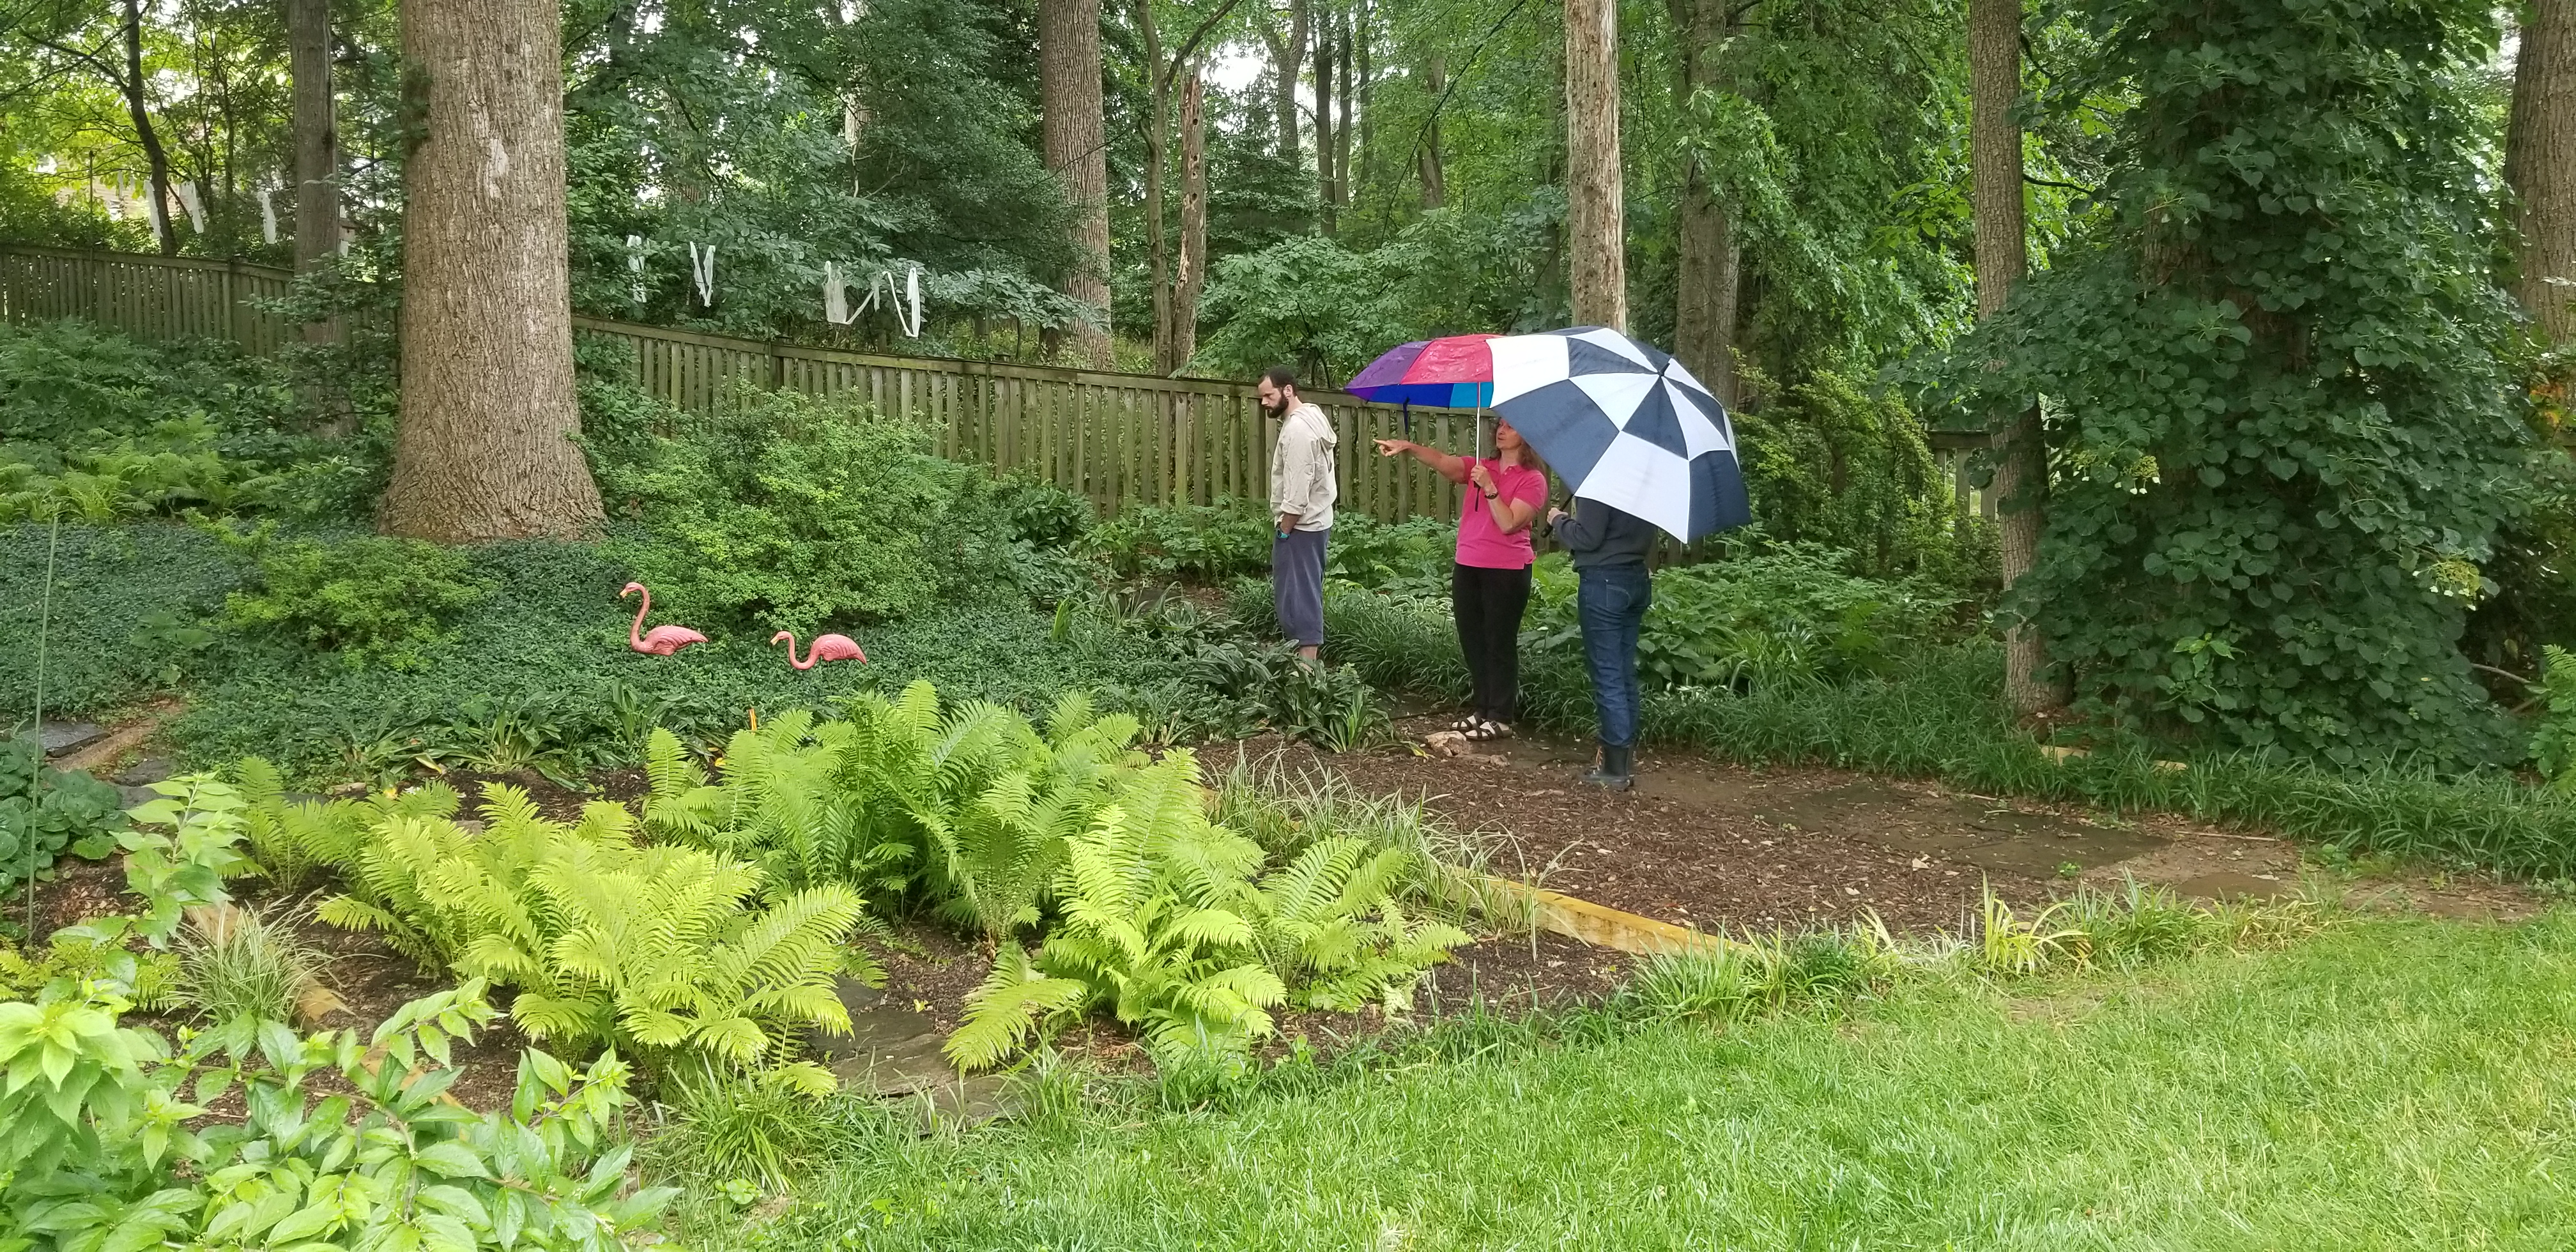 One homeowner showed how they used native plants to control erosion on a slope.